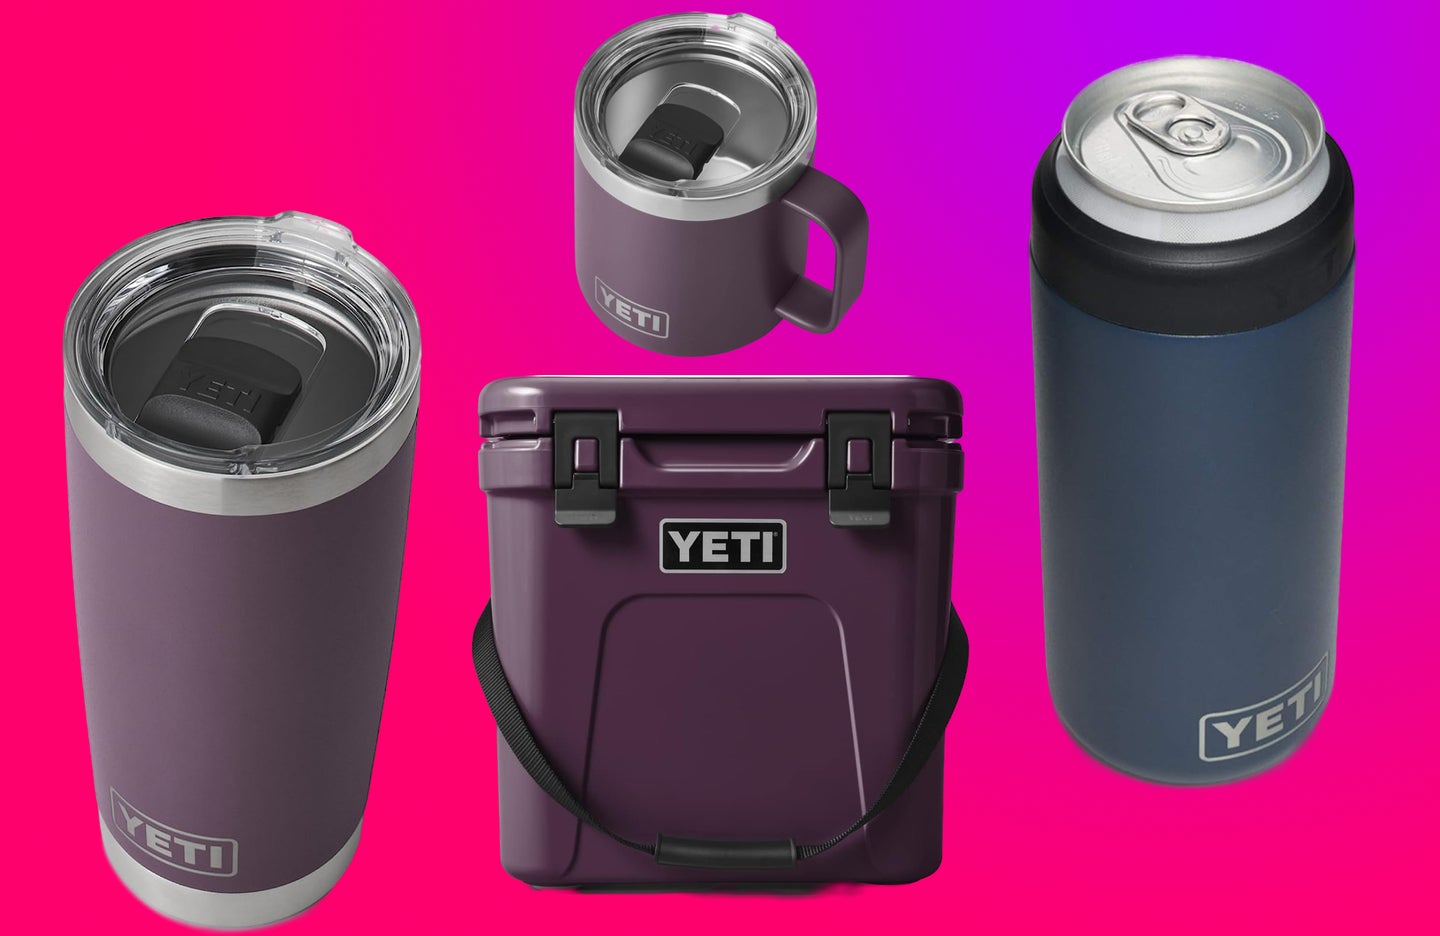 The Best YETI Drinkware and Cooler Deals